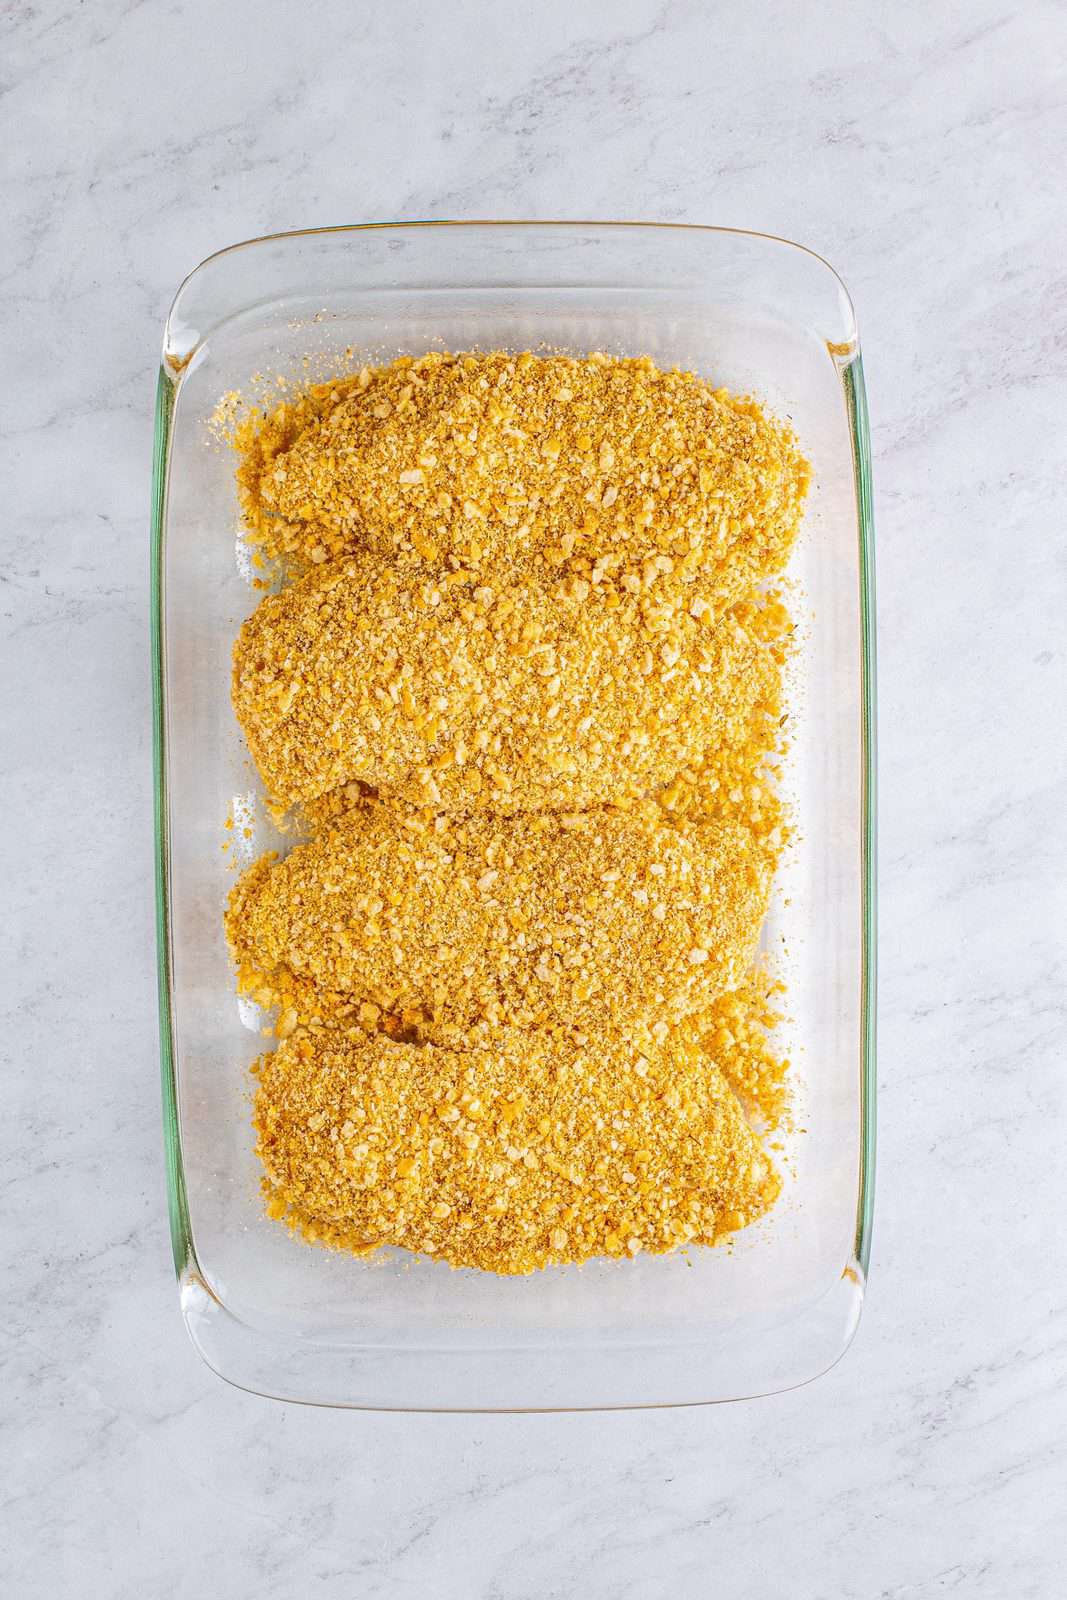 Chicken added to baking dish with extra cracker mixture.